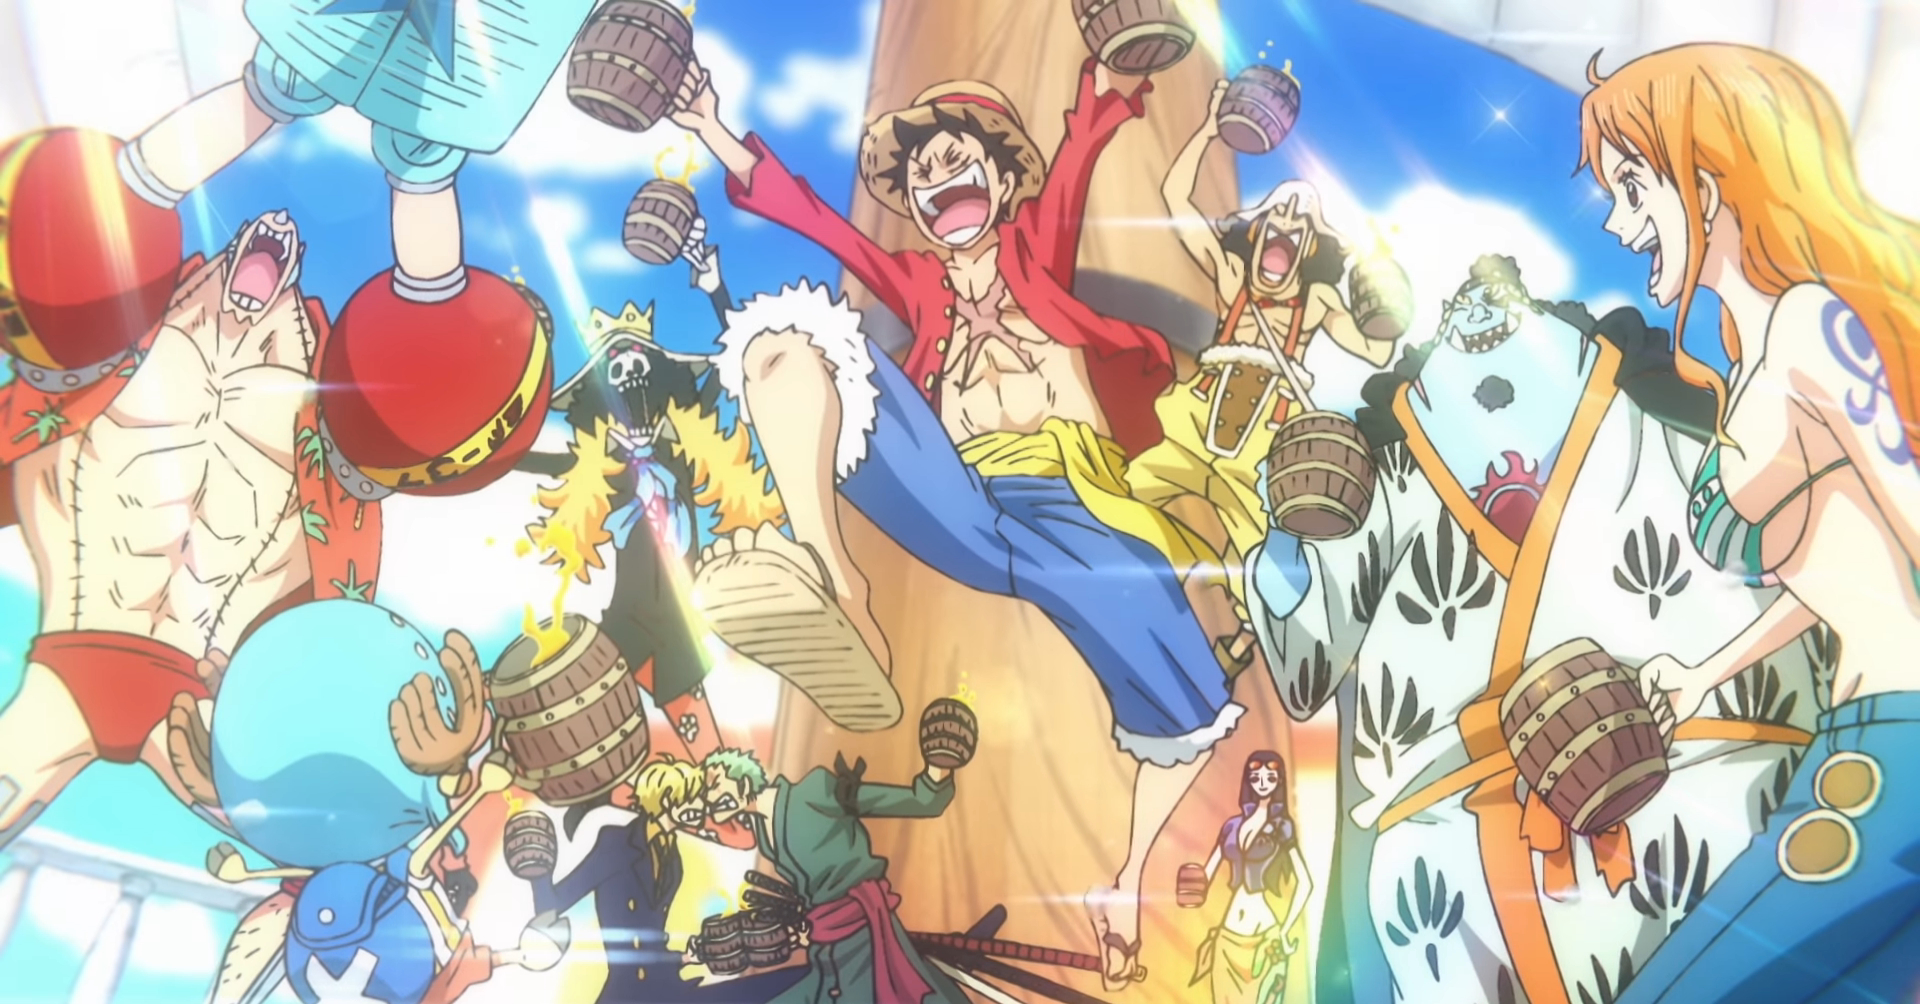 One Piece Episode 1000 Preview: The Straw Hats Get Together - Anime Corner